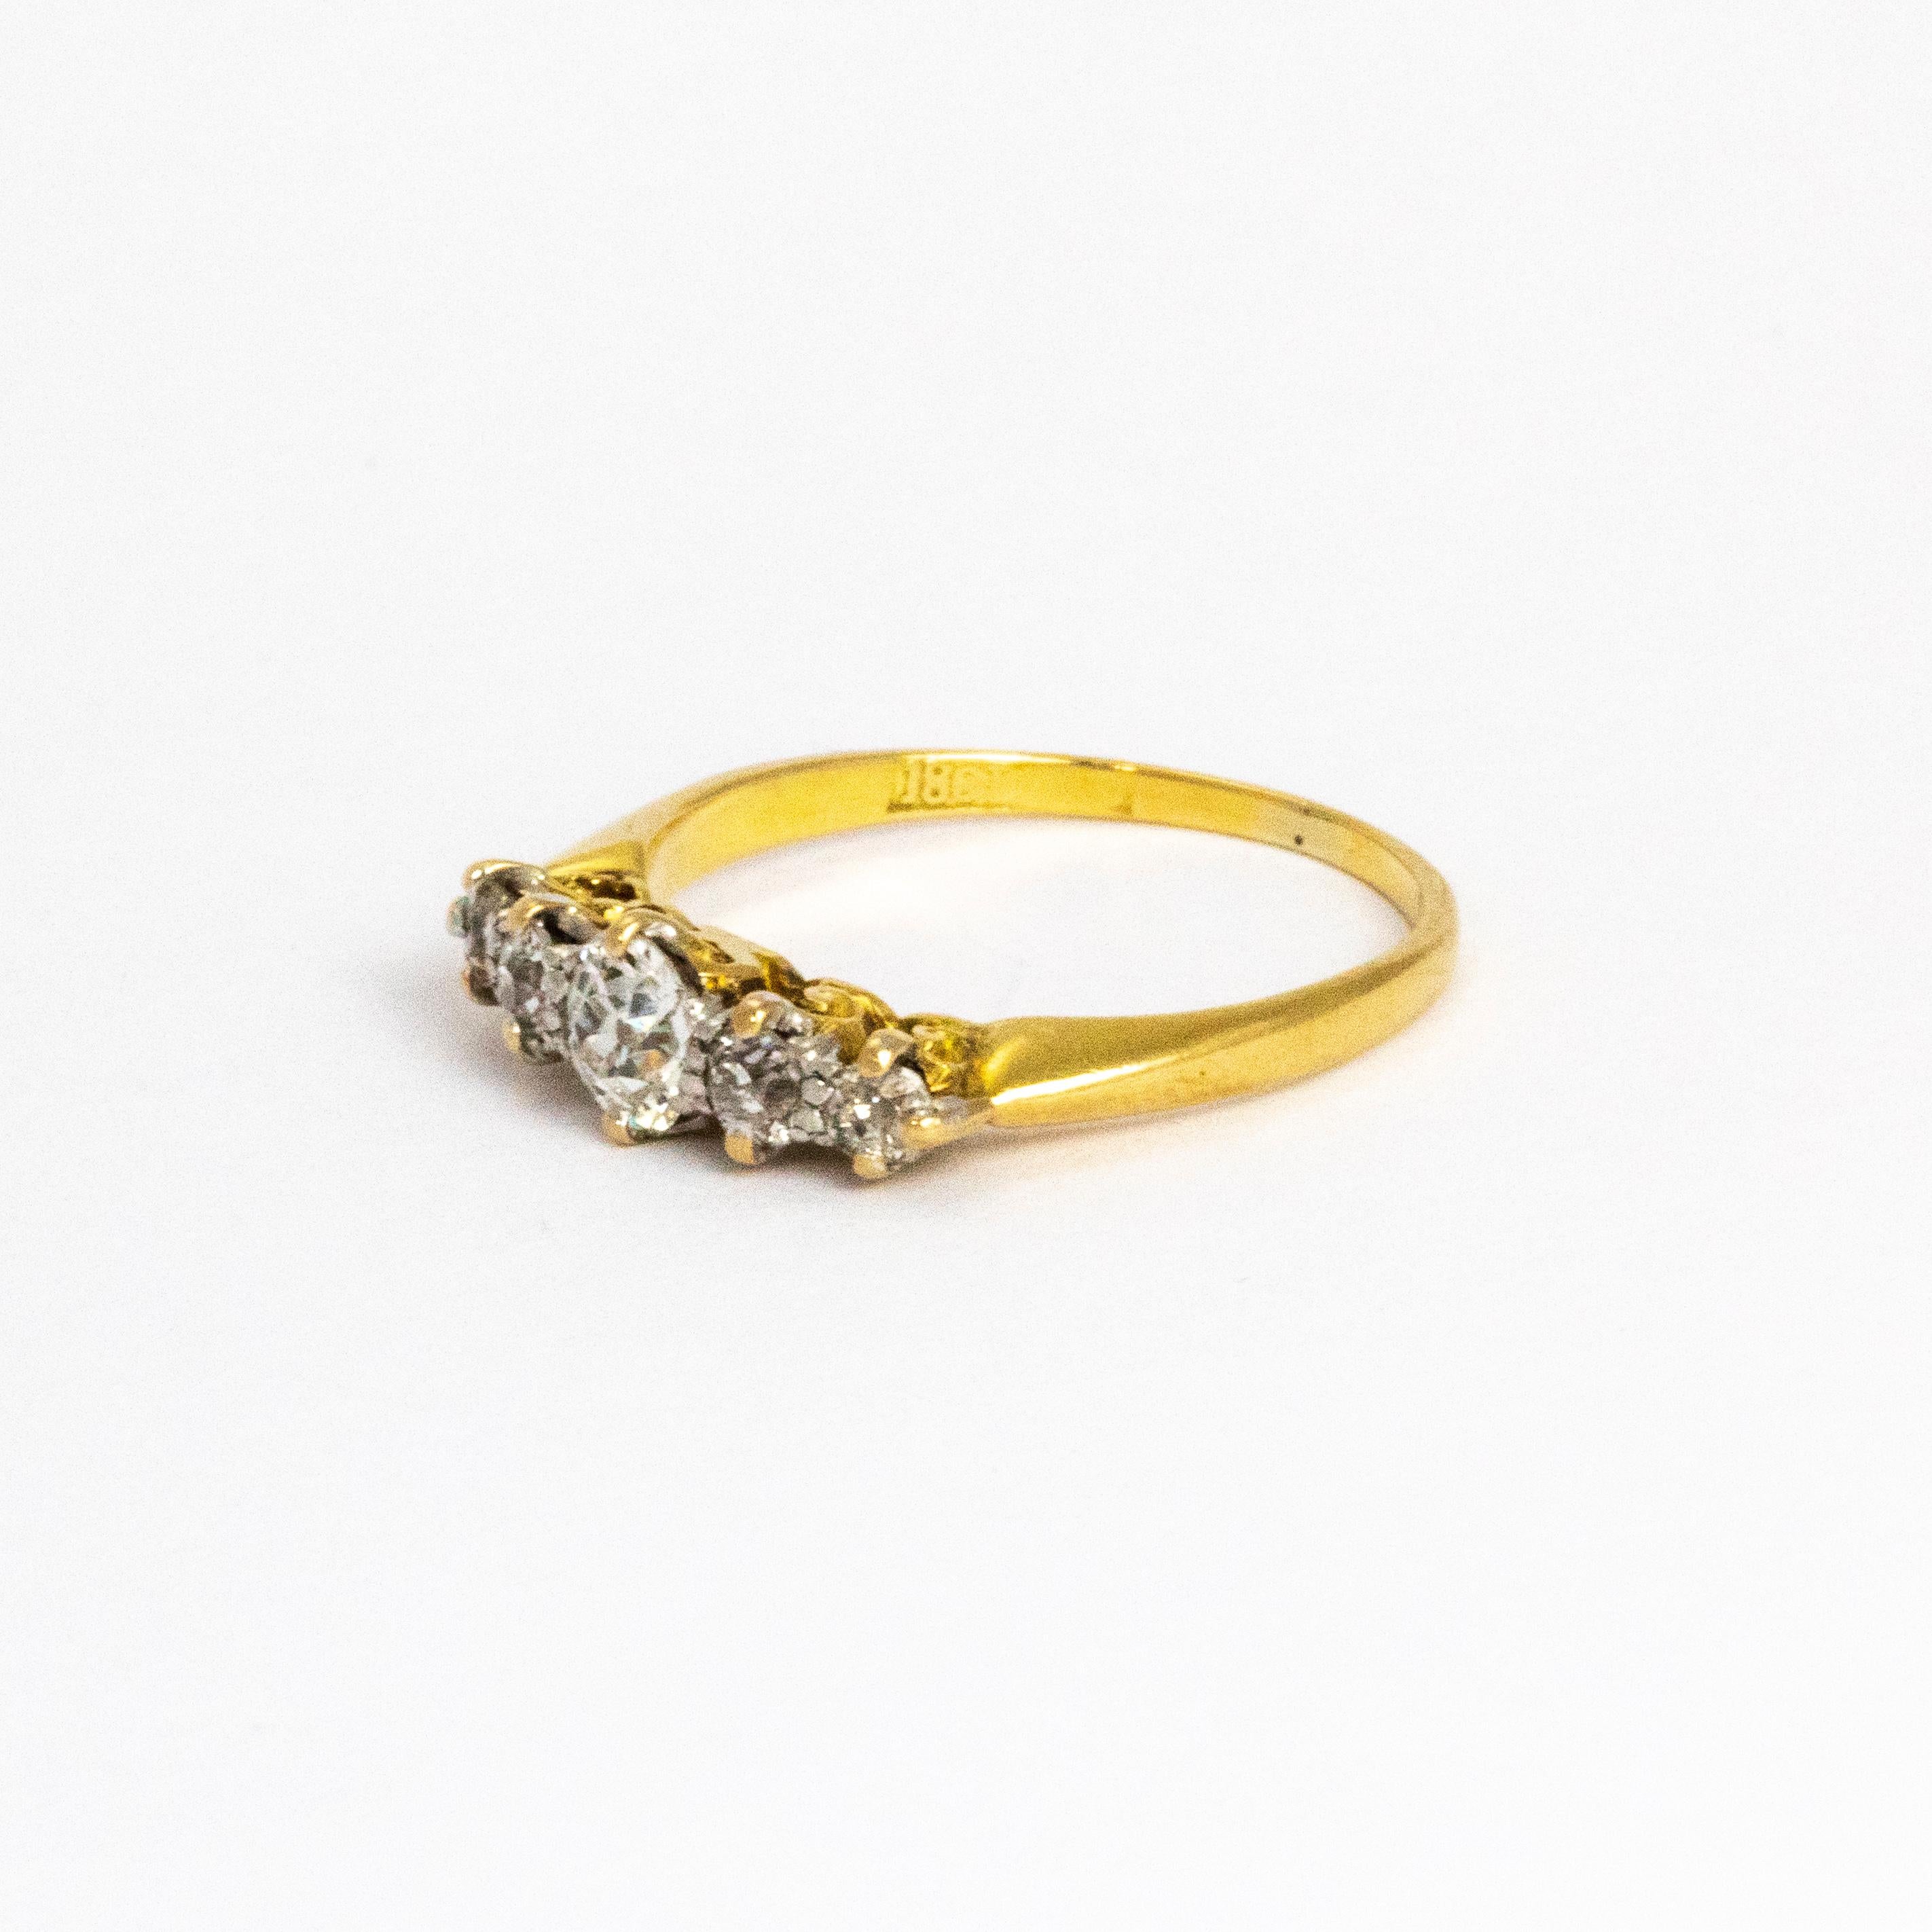 This five stone diamond ring holds five bright and sparkling stones with a total weight of 60pts. The ring is modelled in 18ct gold and has a scroll detailed setting.

Ring Size: M or 6 1/4